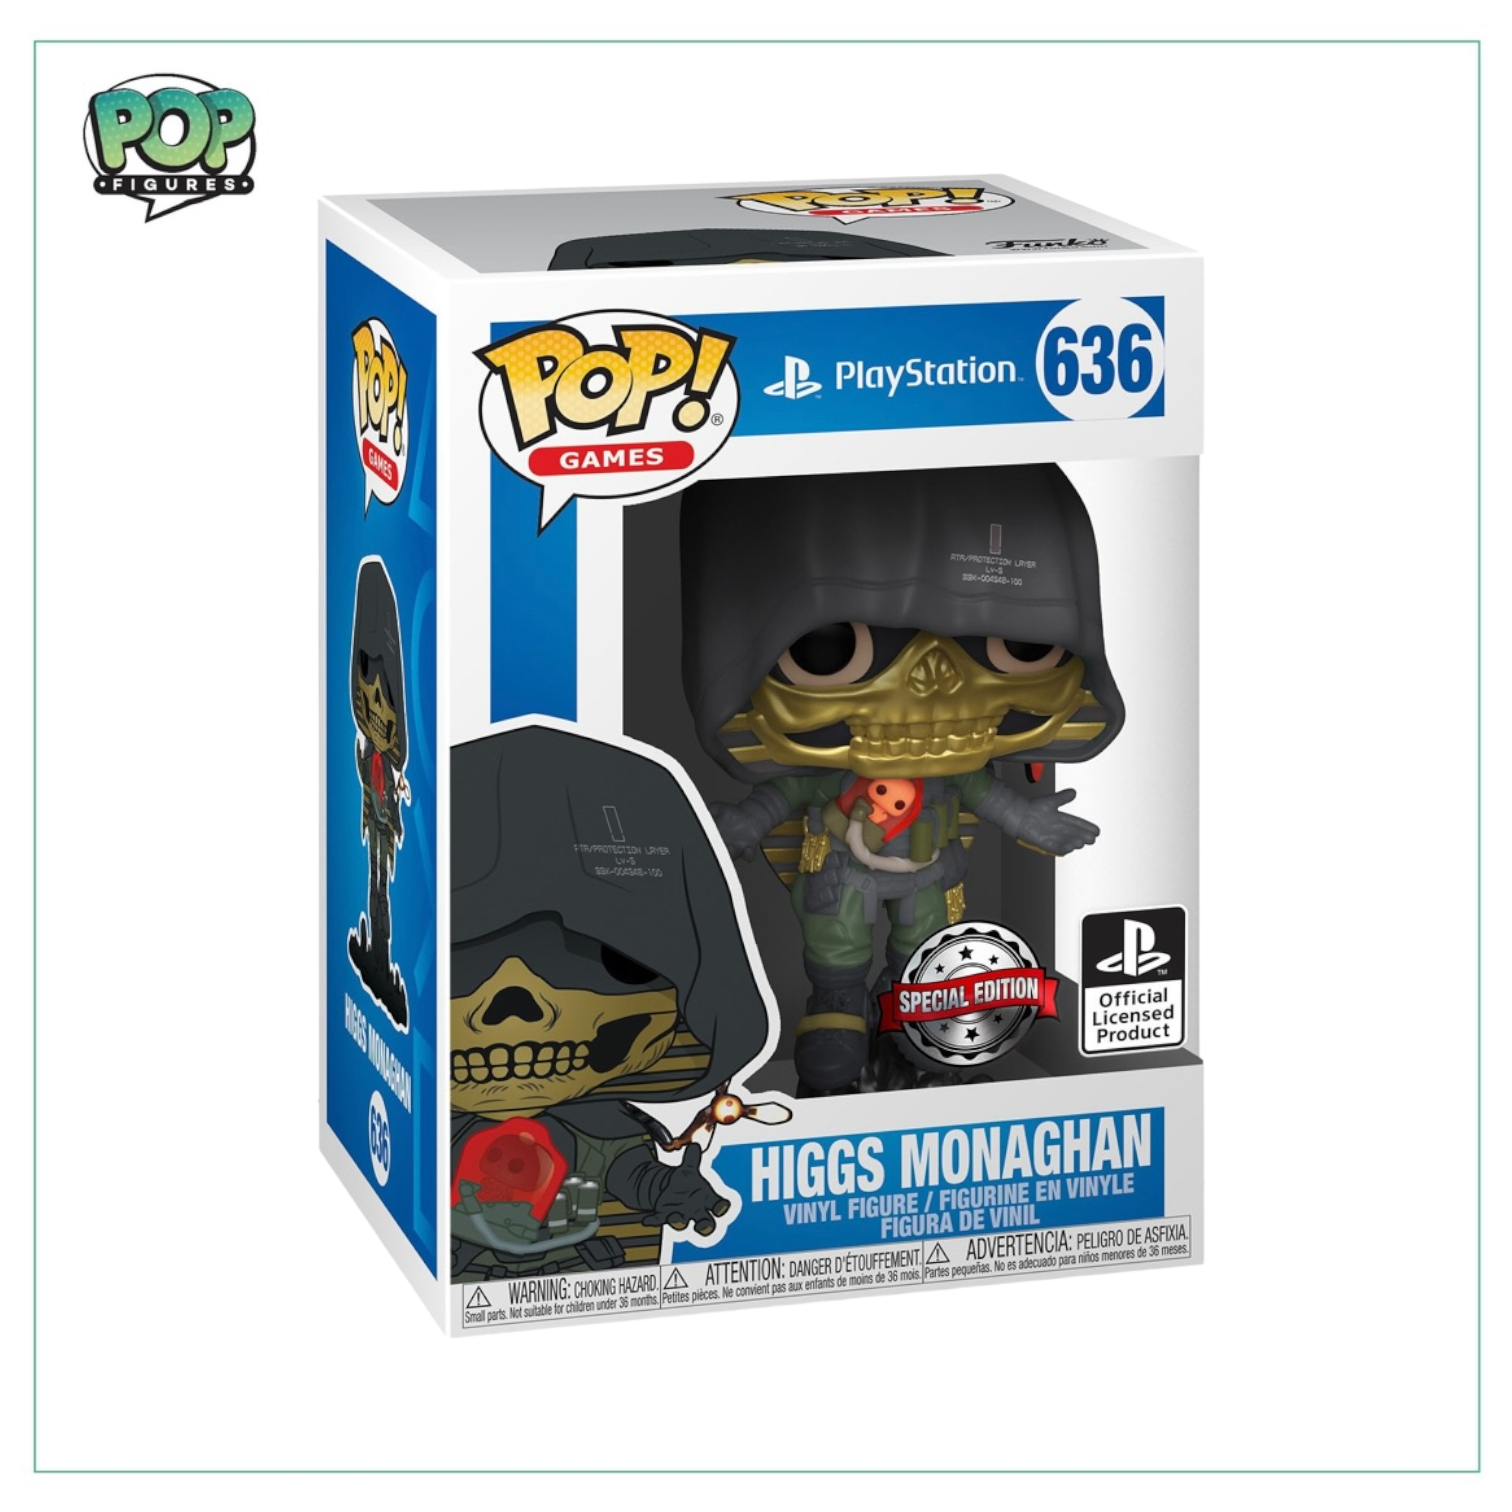 Higgs Monaghan #636 Funko Pop! - Playstation - Special Edition